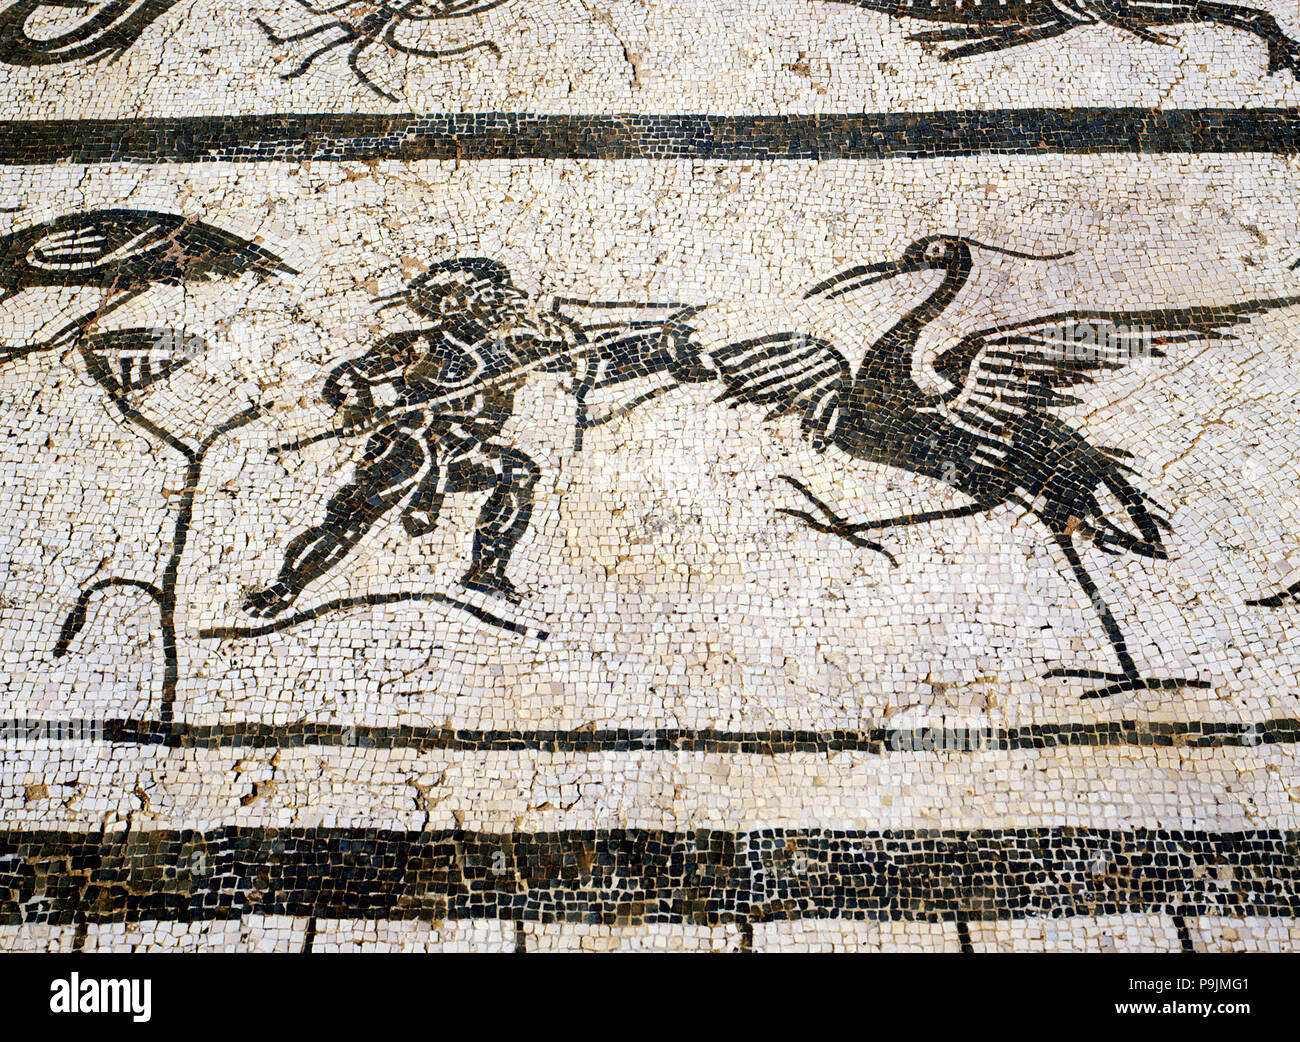 Faun fighting with birds, detail of a mosaic in the city of Italica, founded in 206 BC by Publio … Stock Photo